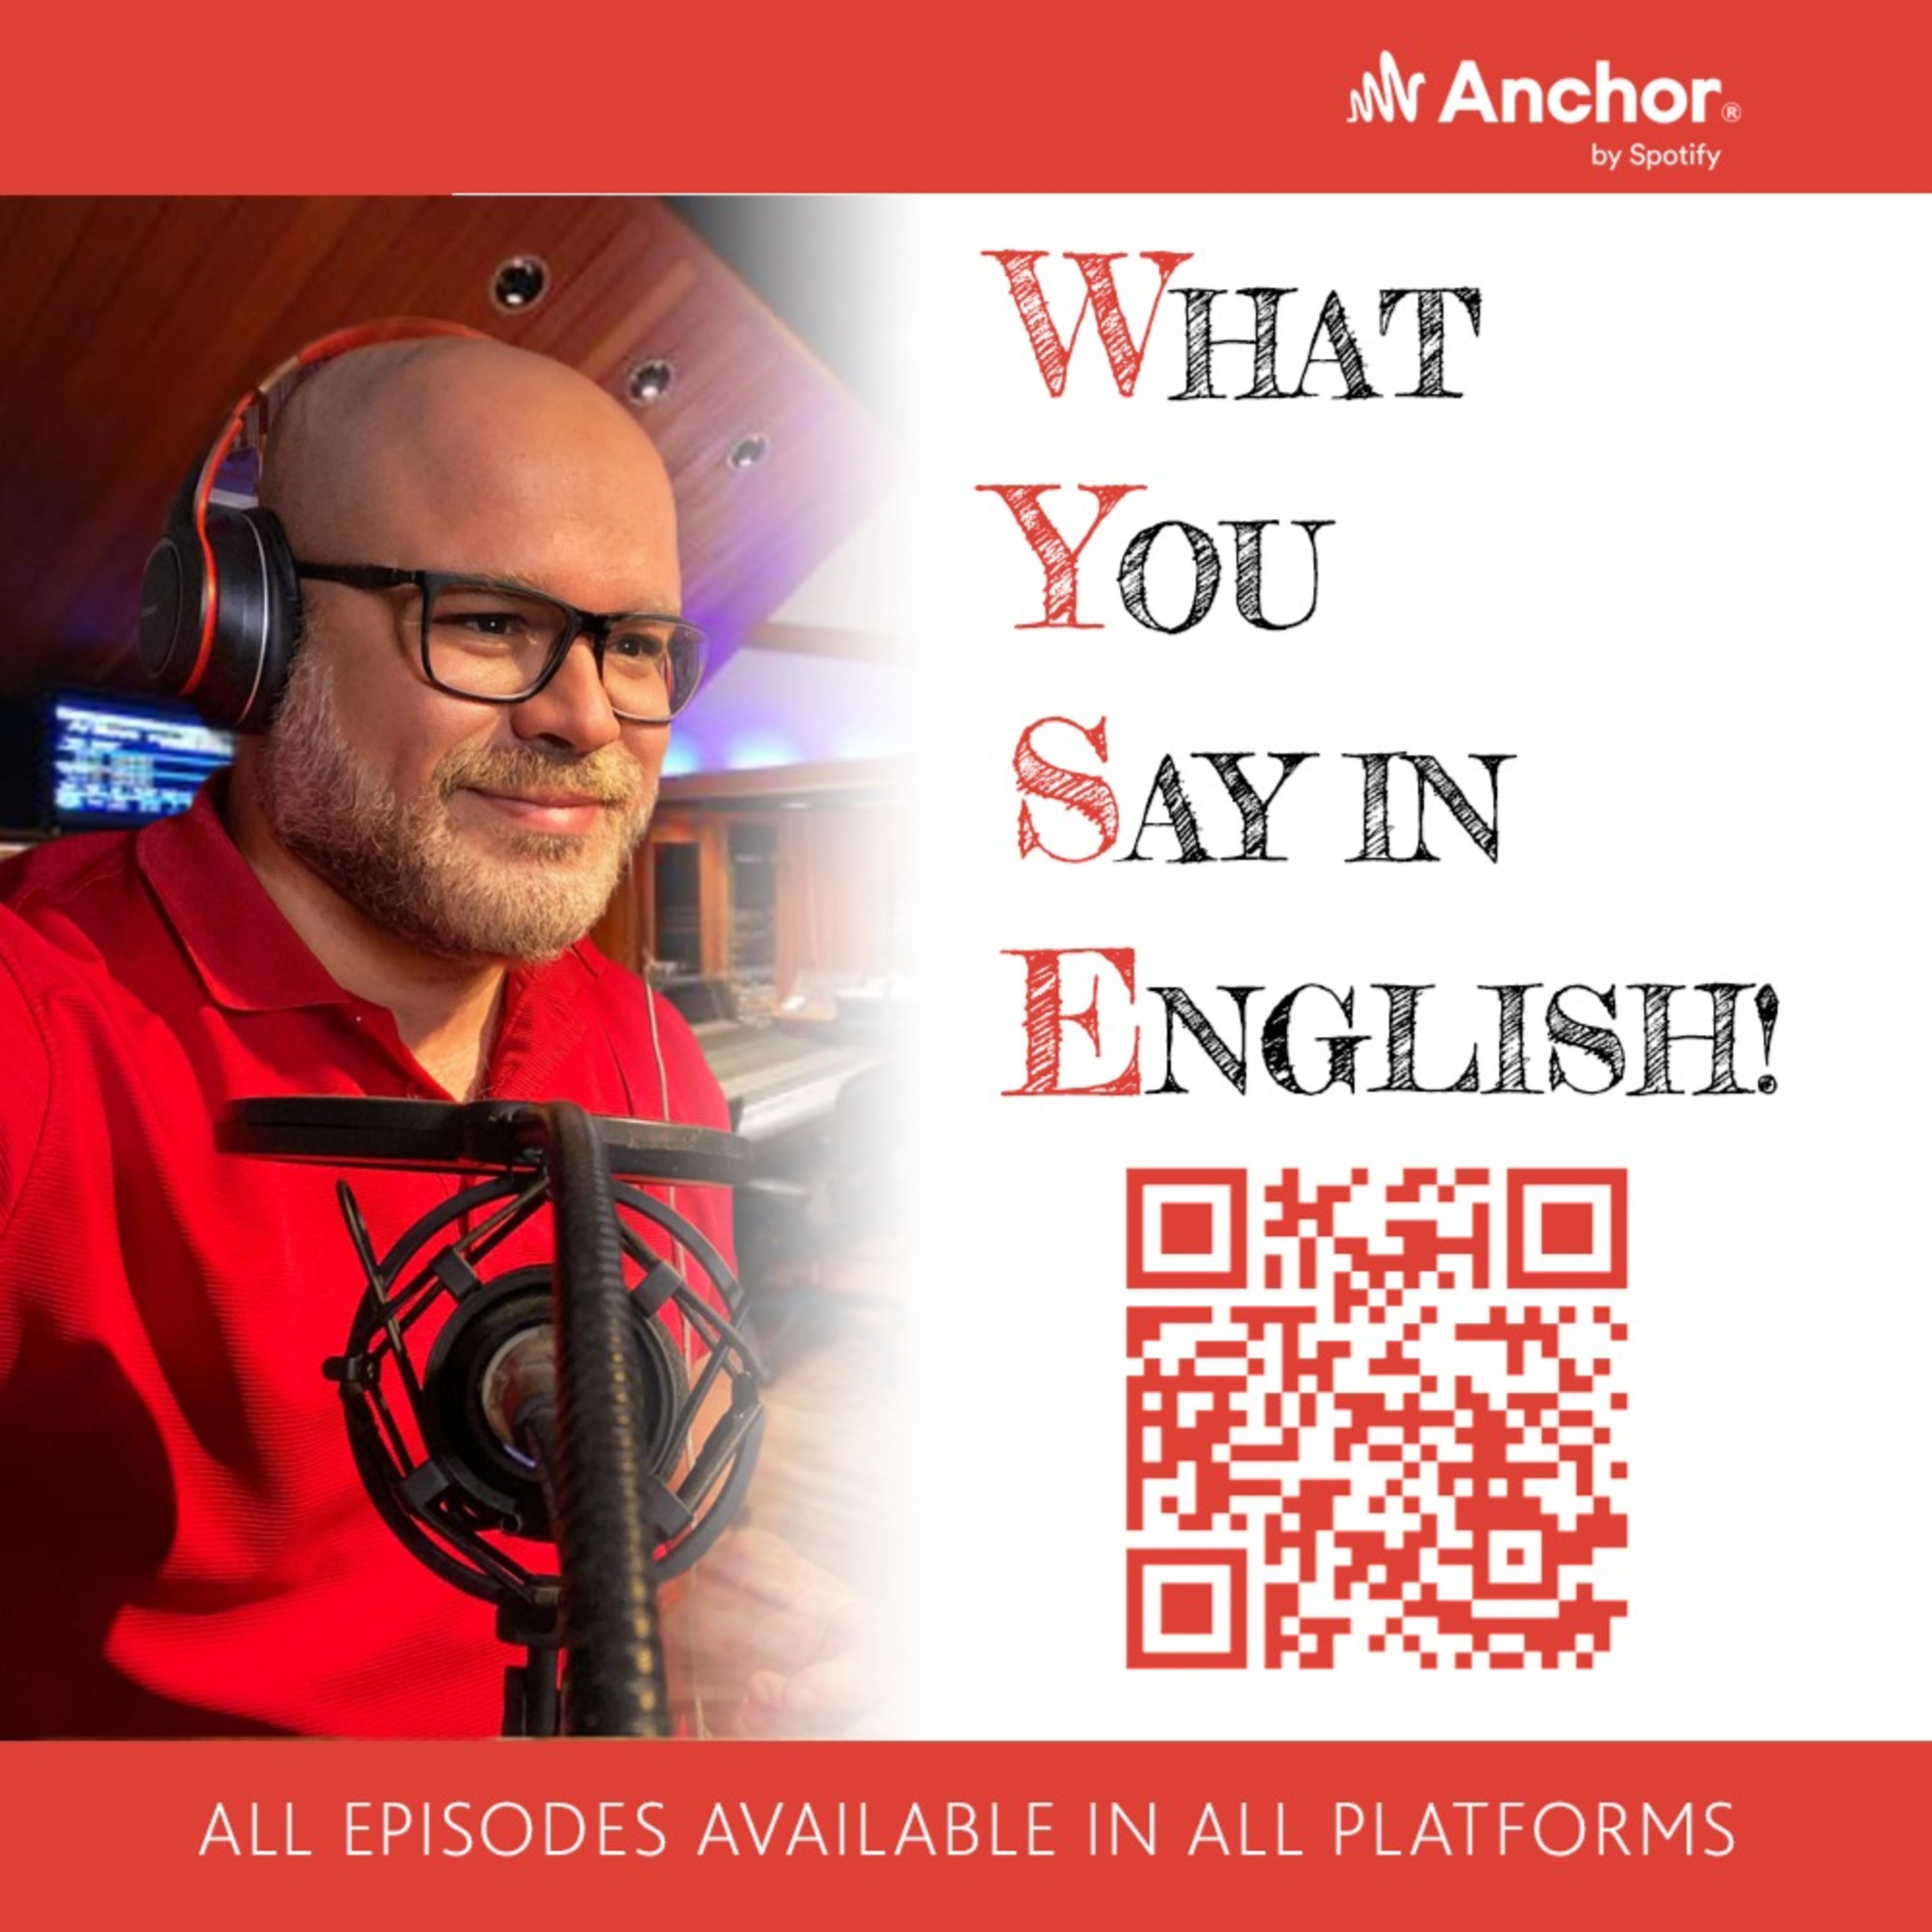 Episode 7: Daniel Goodson shows us how good an English learner can get.